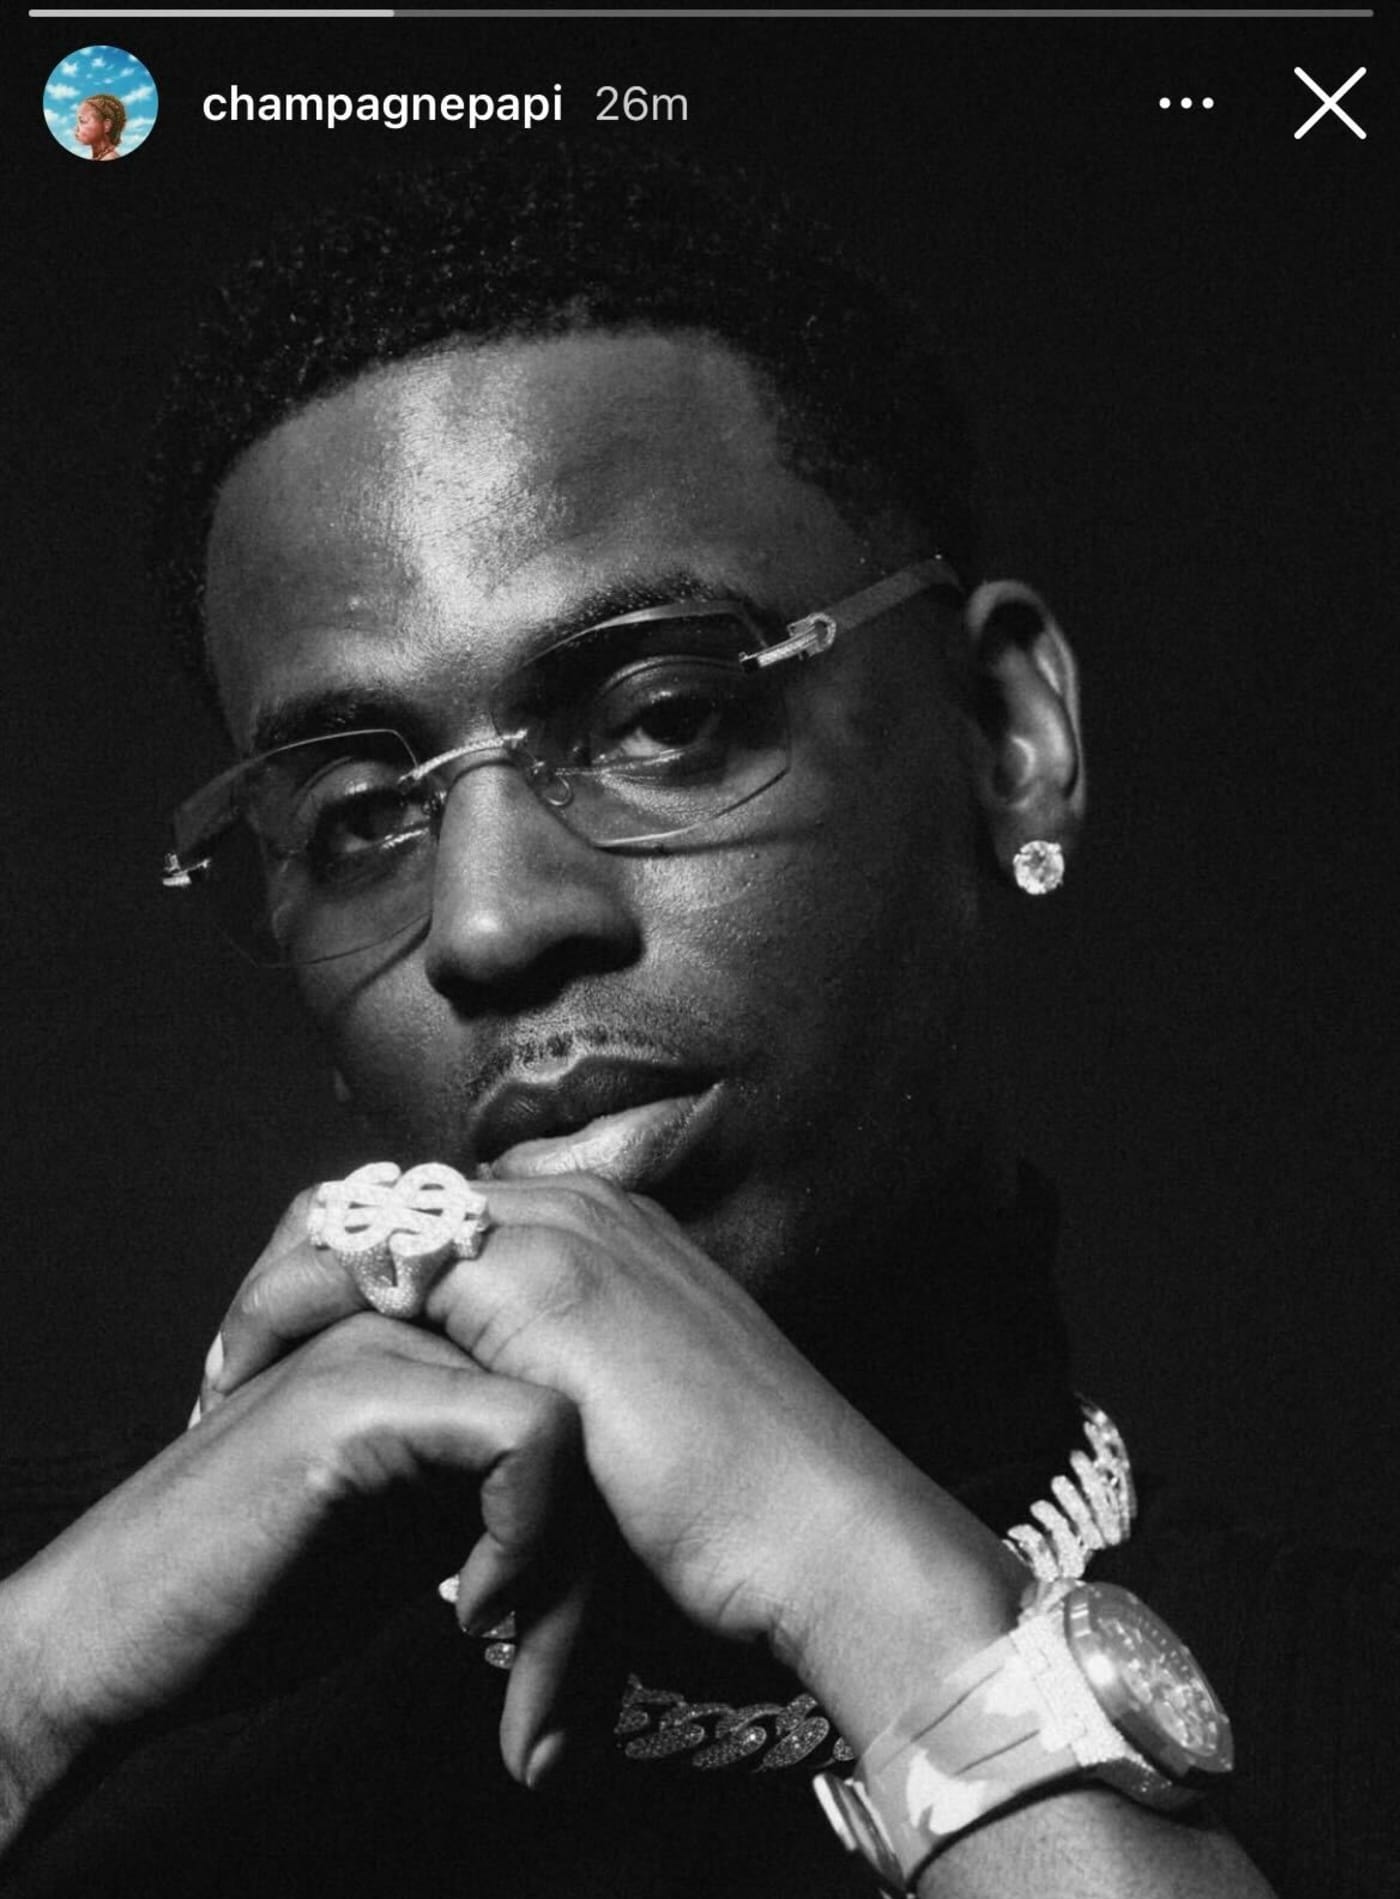 Drake pays tribute to Young Dolph